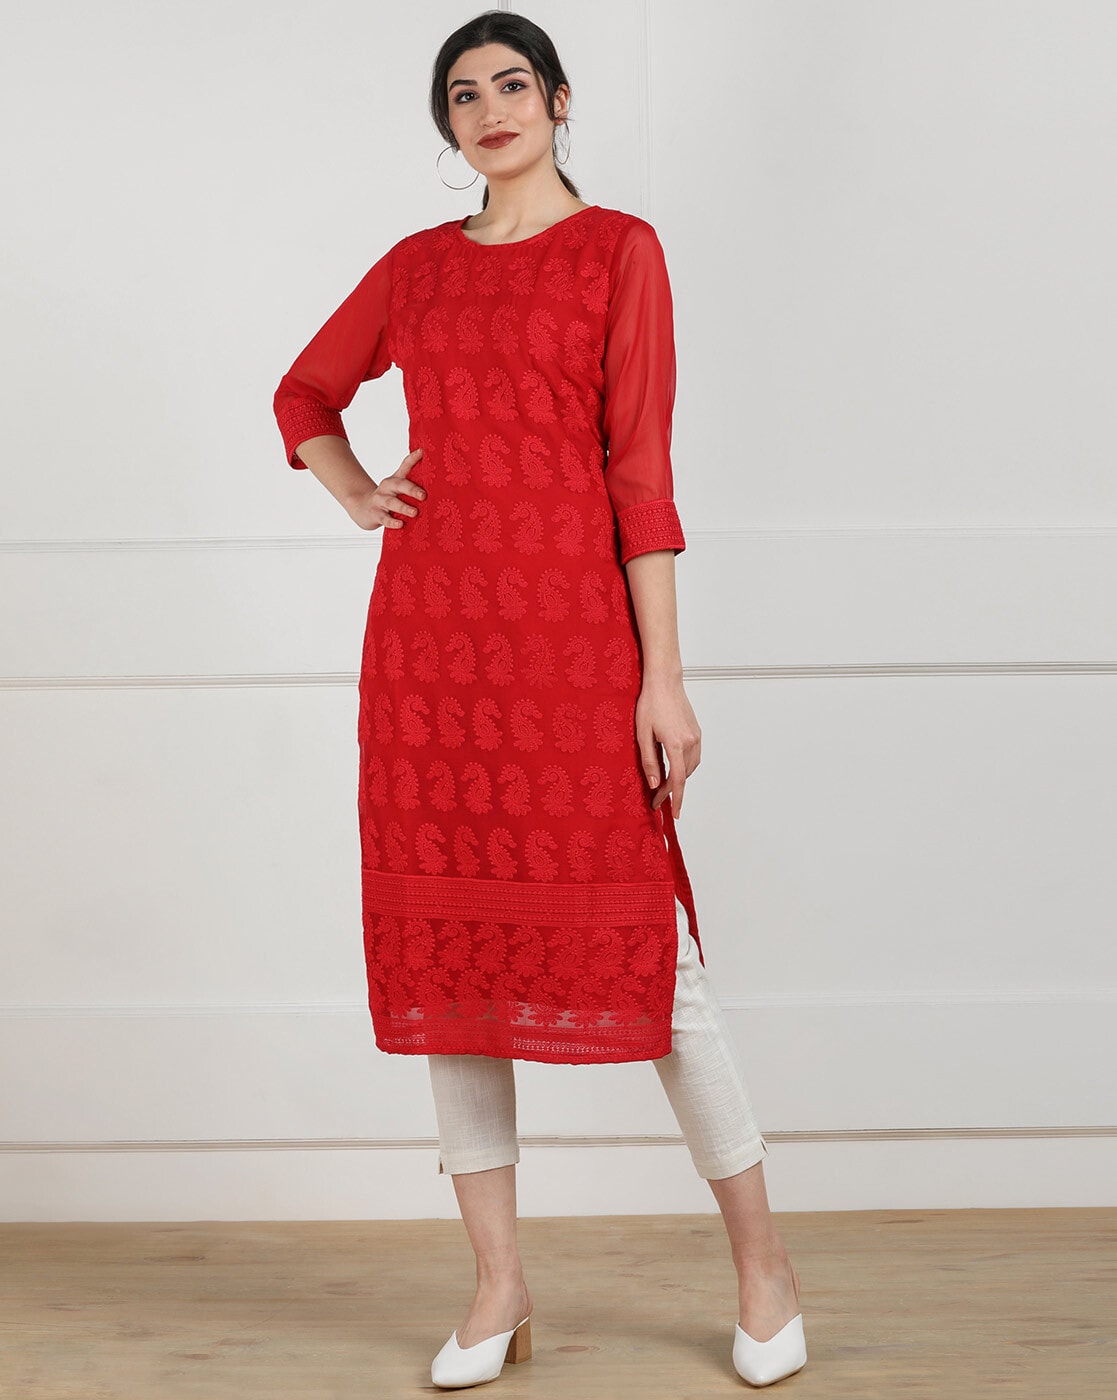 Details 75+ lucknow chikan red kurti